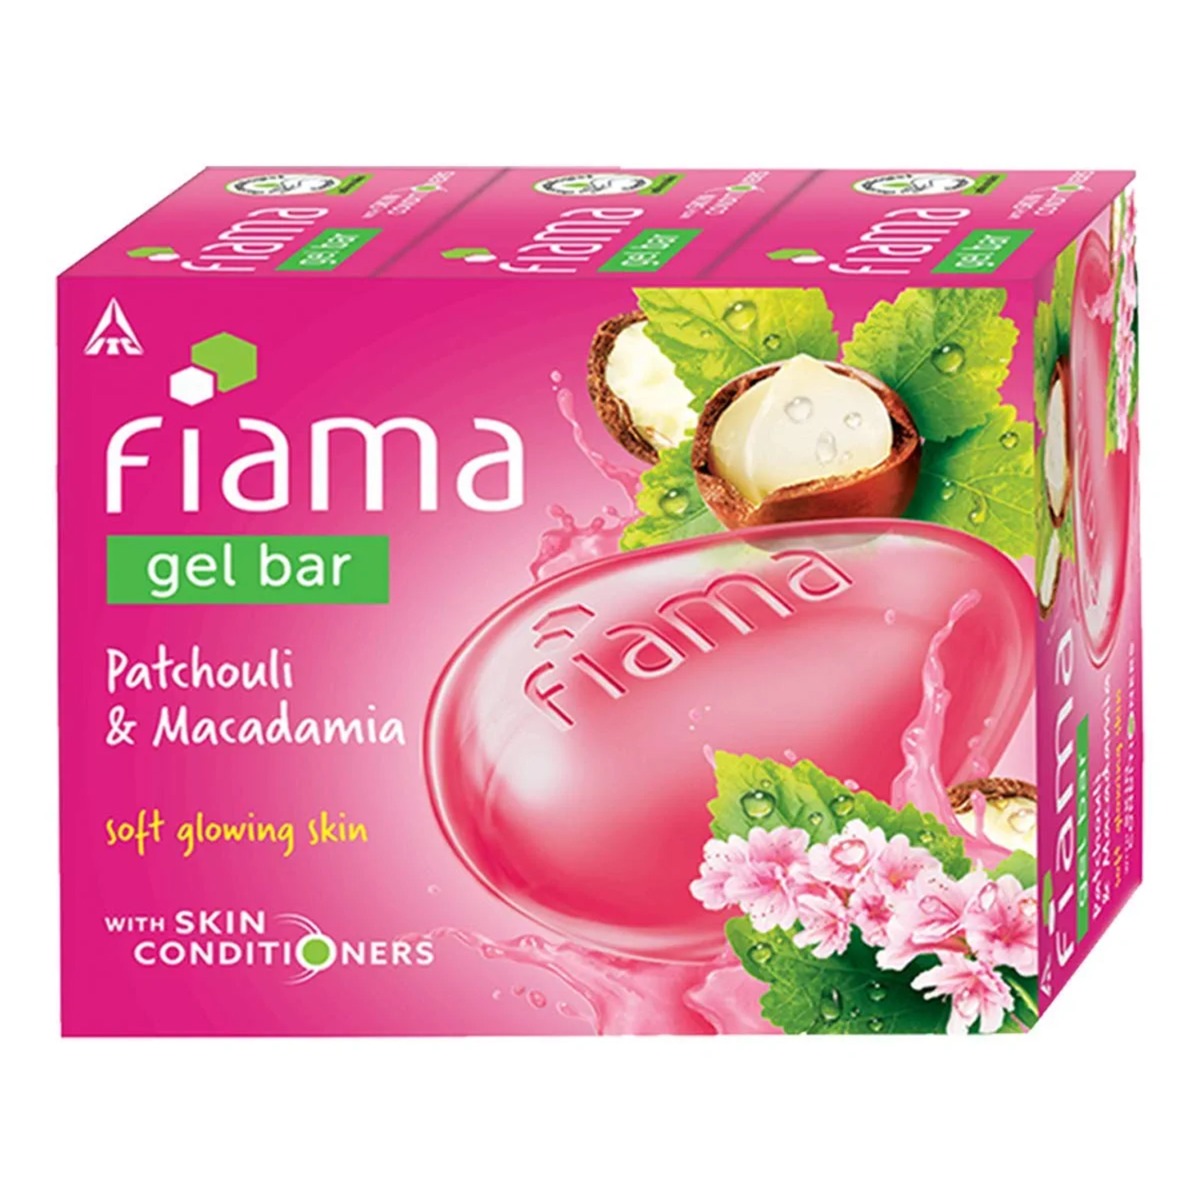 Fiama Gel Bar Patchouli And Macadamia For Soft Glowing Skin, With Skin Conditioners - Pack of 3, 125gm each